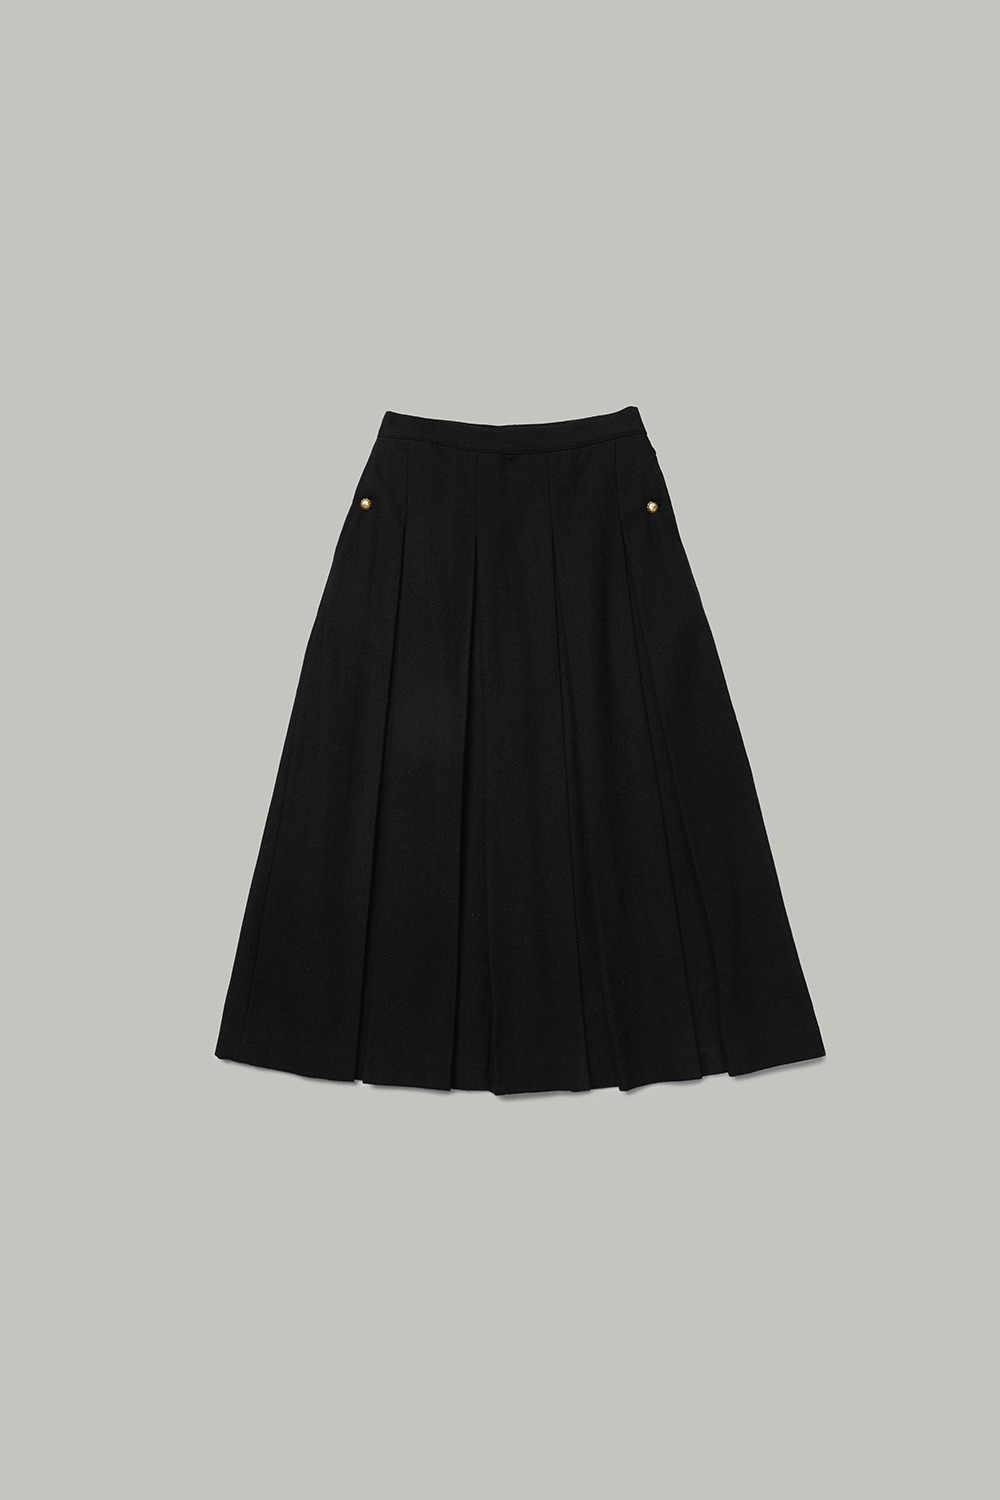 8th/Gold button pleated skirt